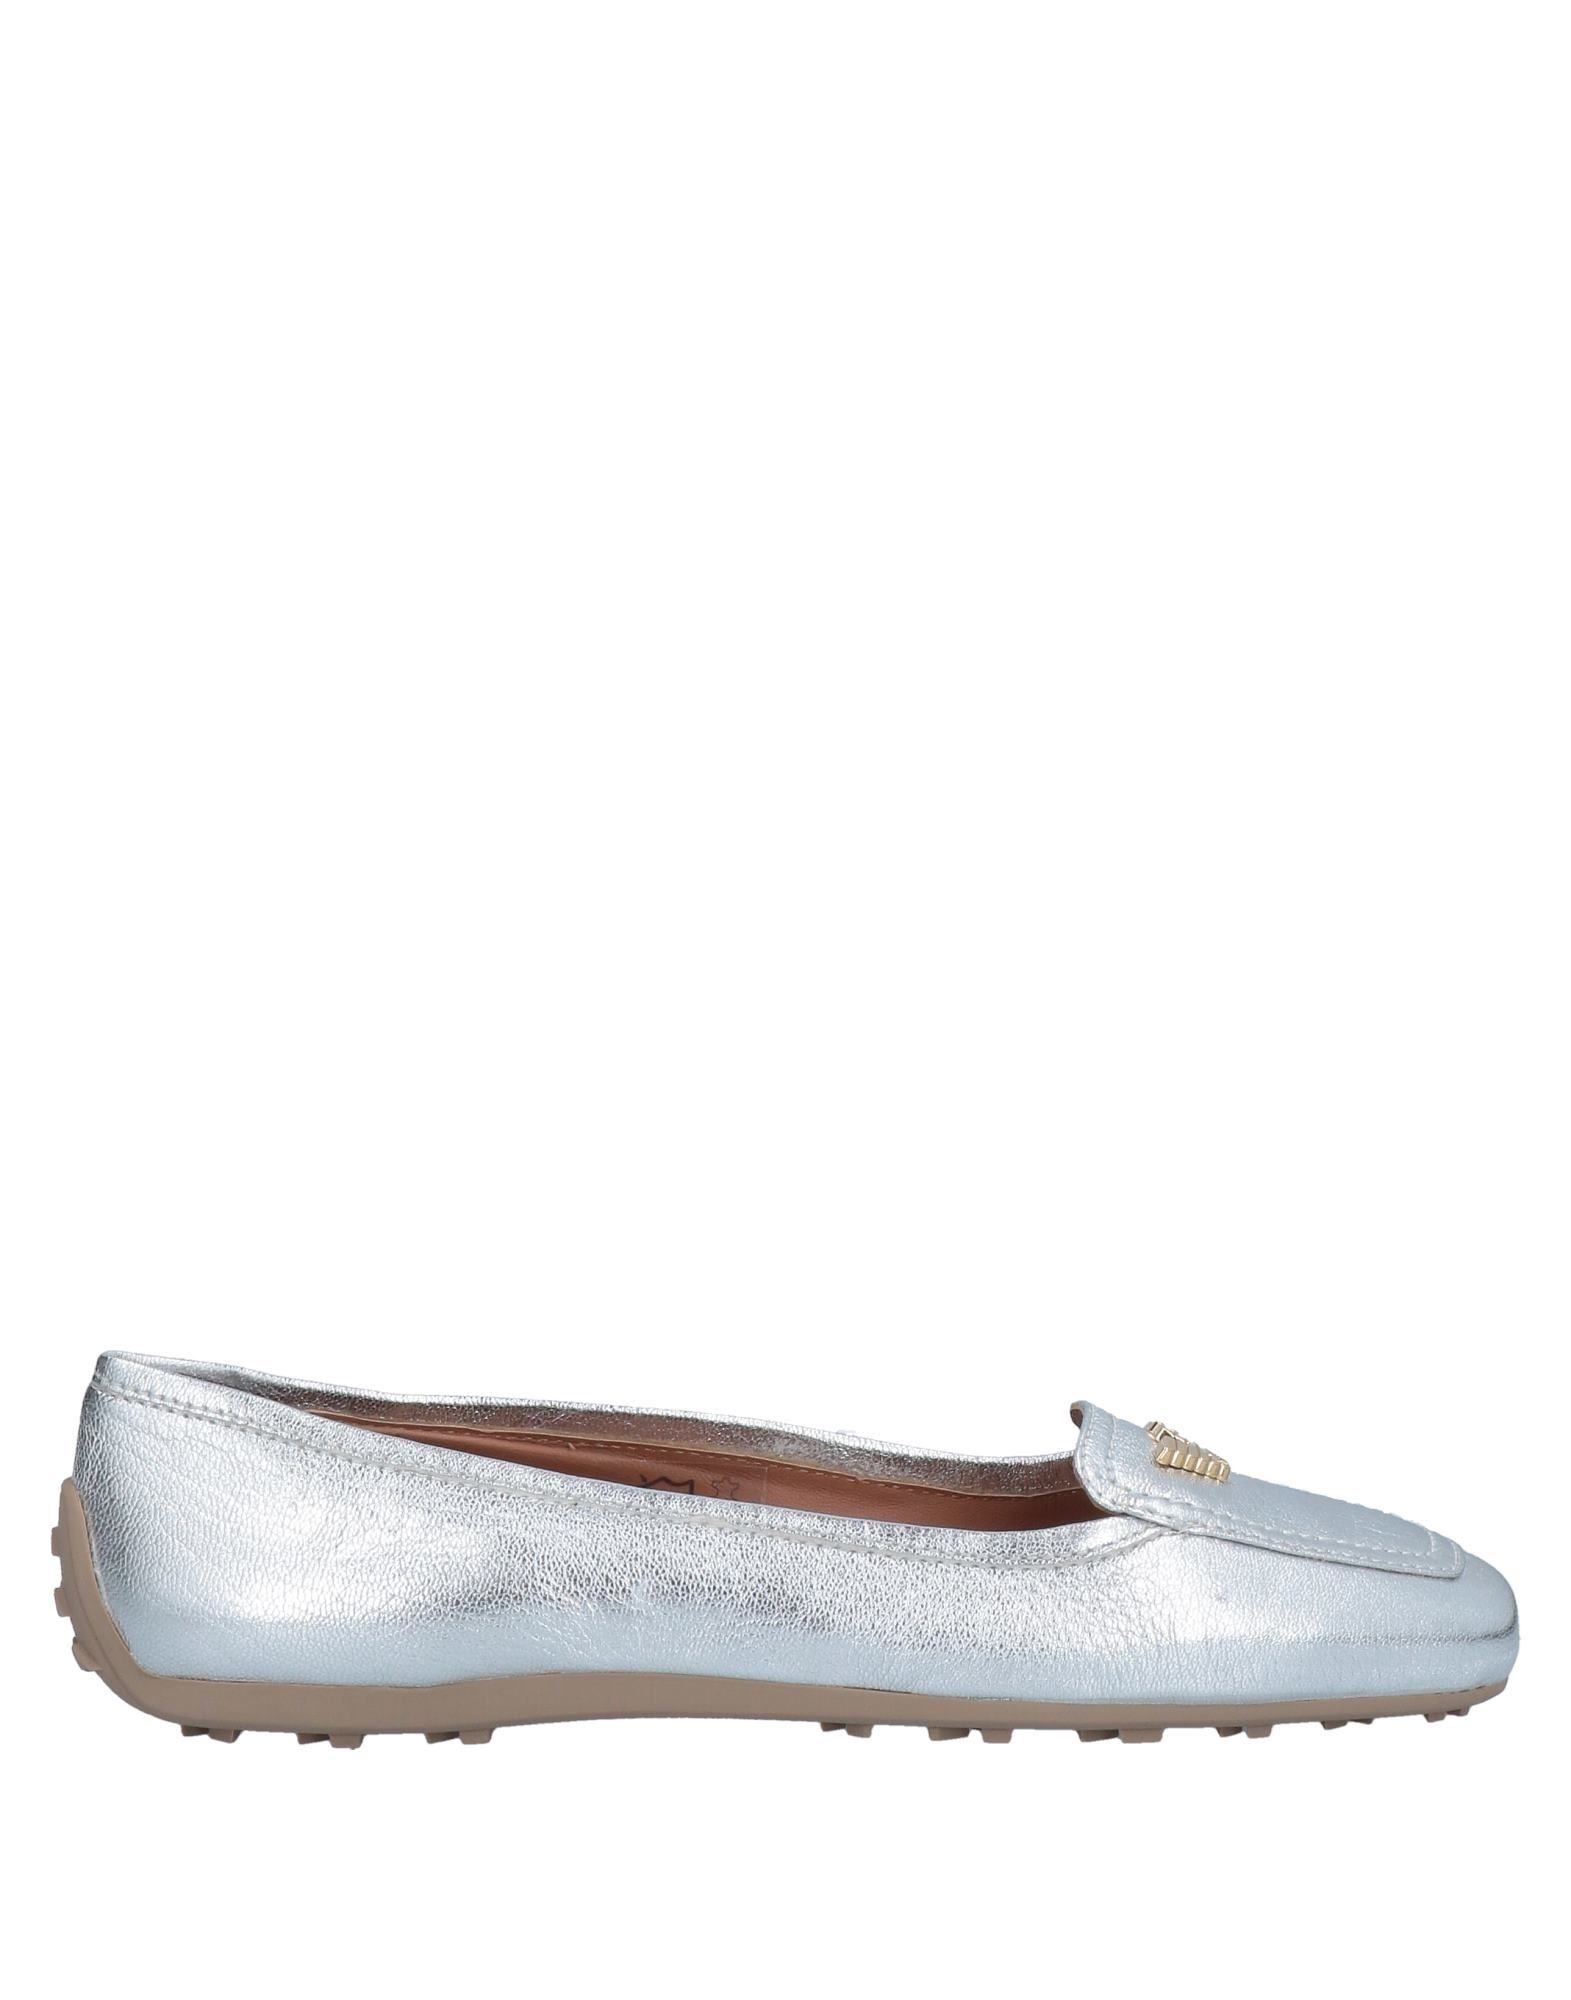 Women's EMPORIO ARMANI Loafers Sale, Up To 70% Off | ModeSens